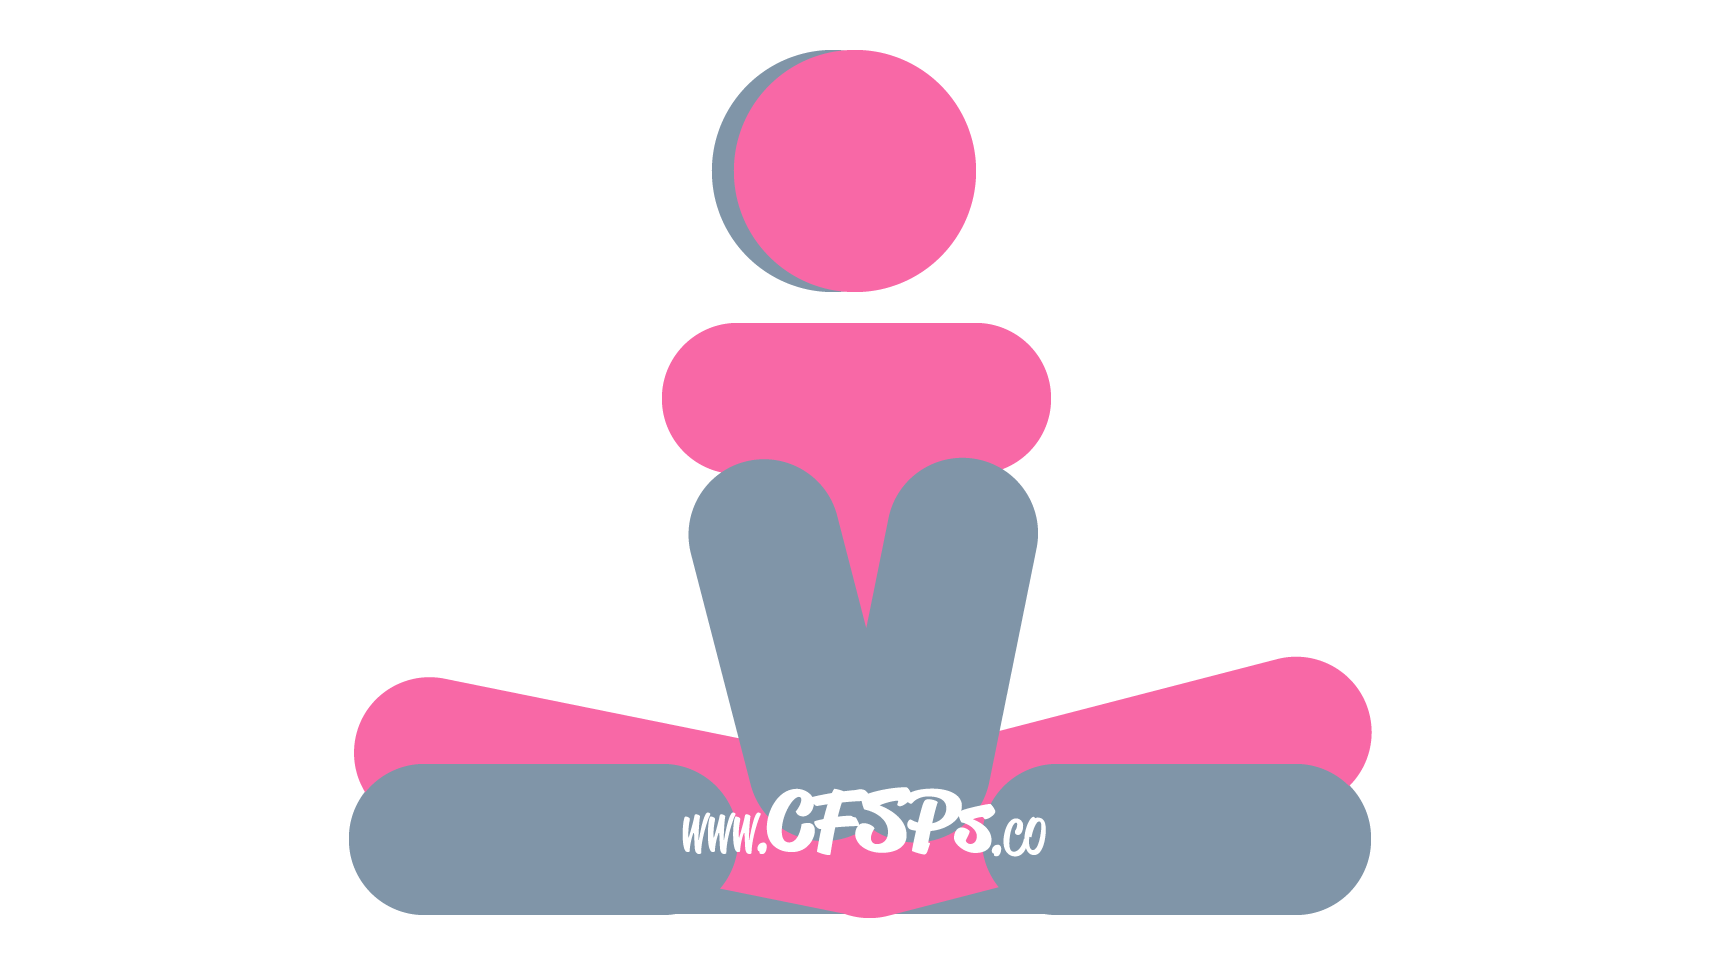 This stick figure image depicts a man and woman having sex in the Lotus Blossom sex position. The man is sitting Indian-style with the bottoms of his feet touching. The woman is sitting in his lap with her legs wrapped around his pelvis. The man's arms are wrapped around her waist, and her arms are wrapped around his neck.